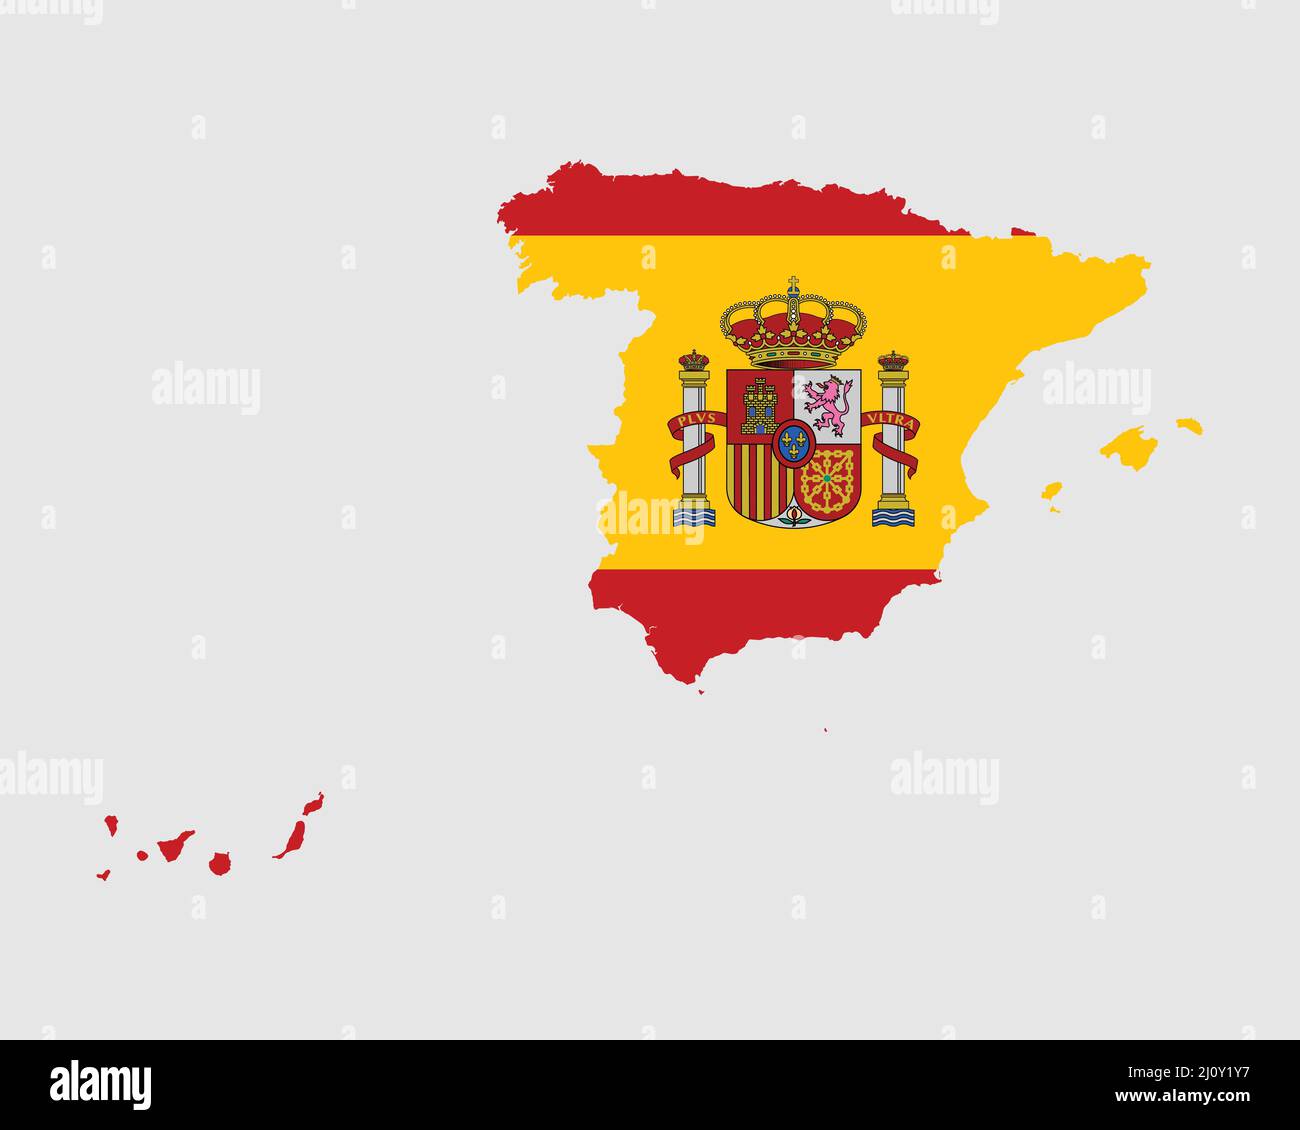 Spain Flag Map. Map of the Kingdom of Spain with the Spanish country banner. Vector Illustration Stock Vector